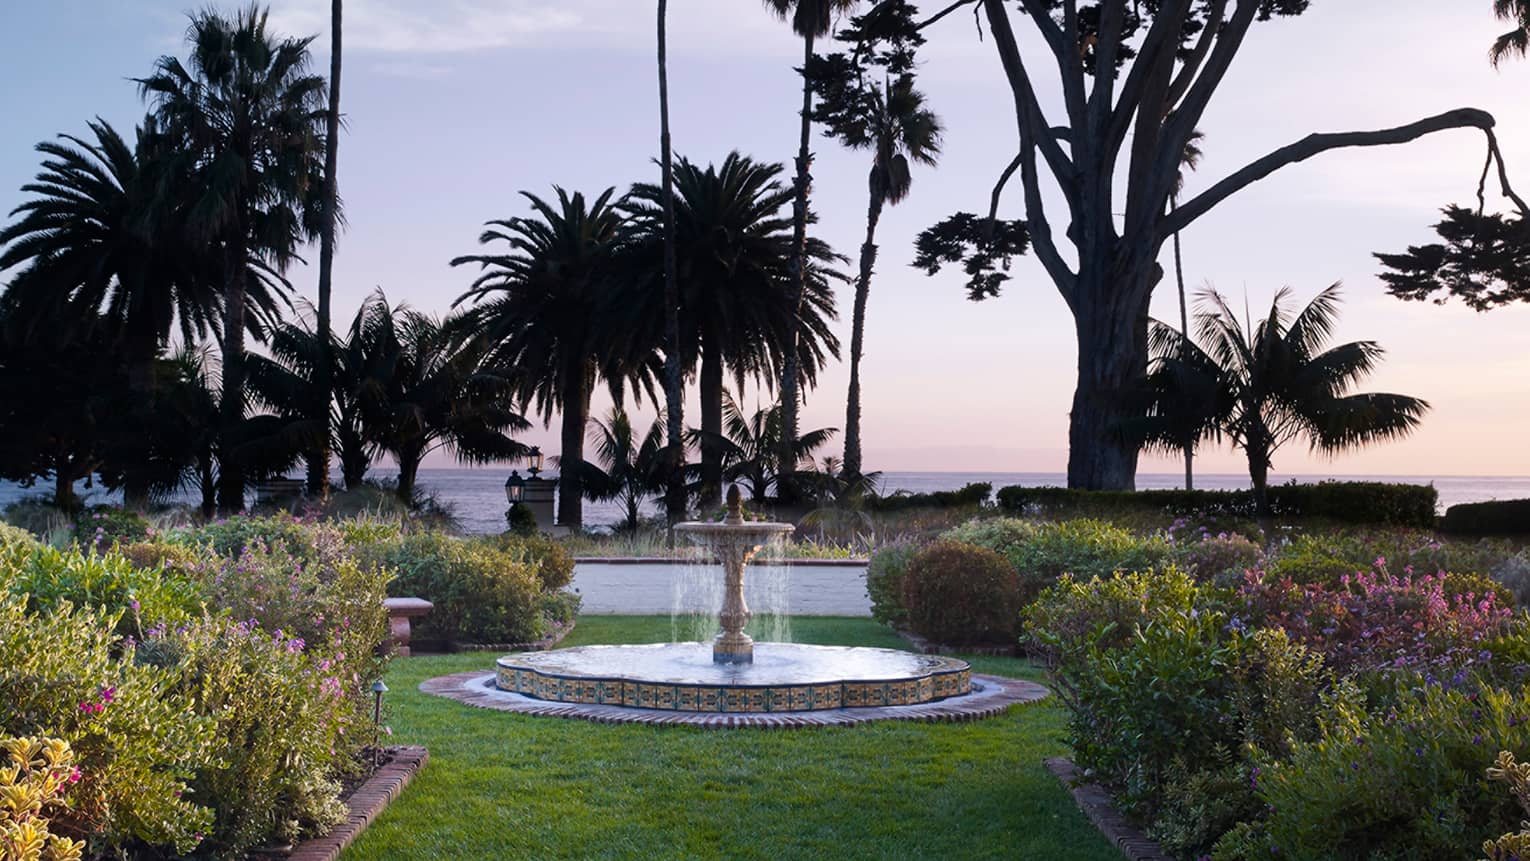 Small circular fountain on lawn, garden, silhouettes of palm trees against sunset